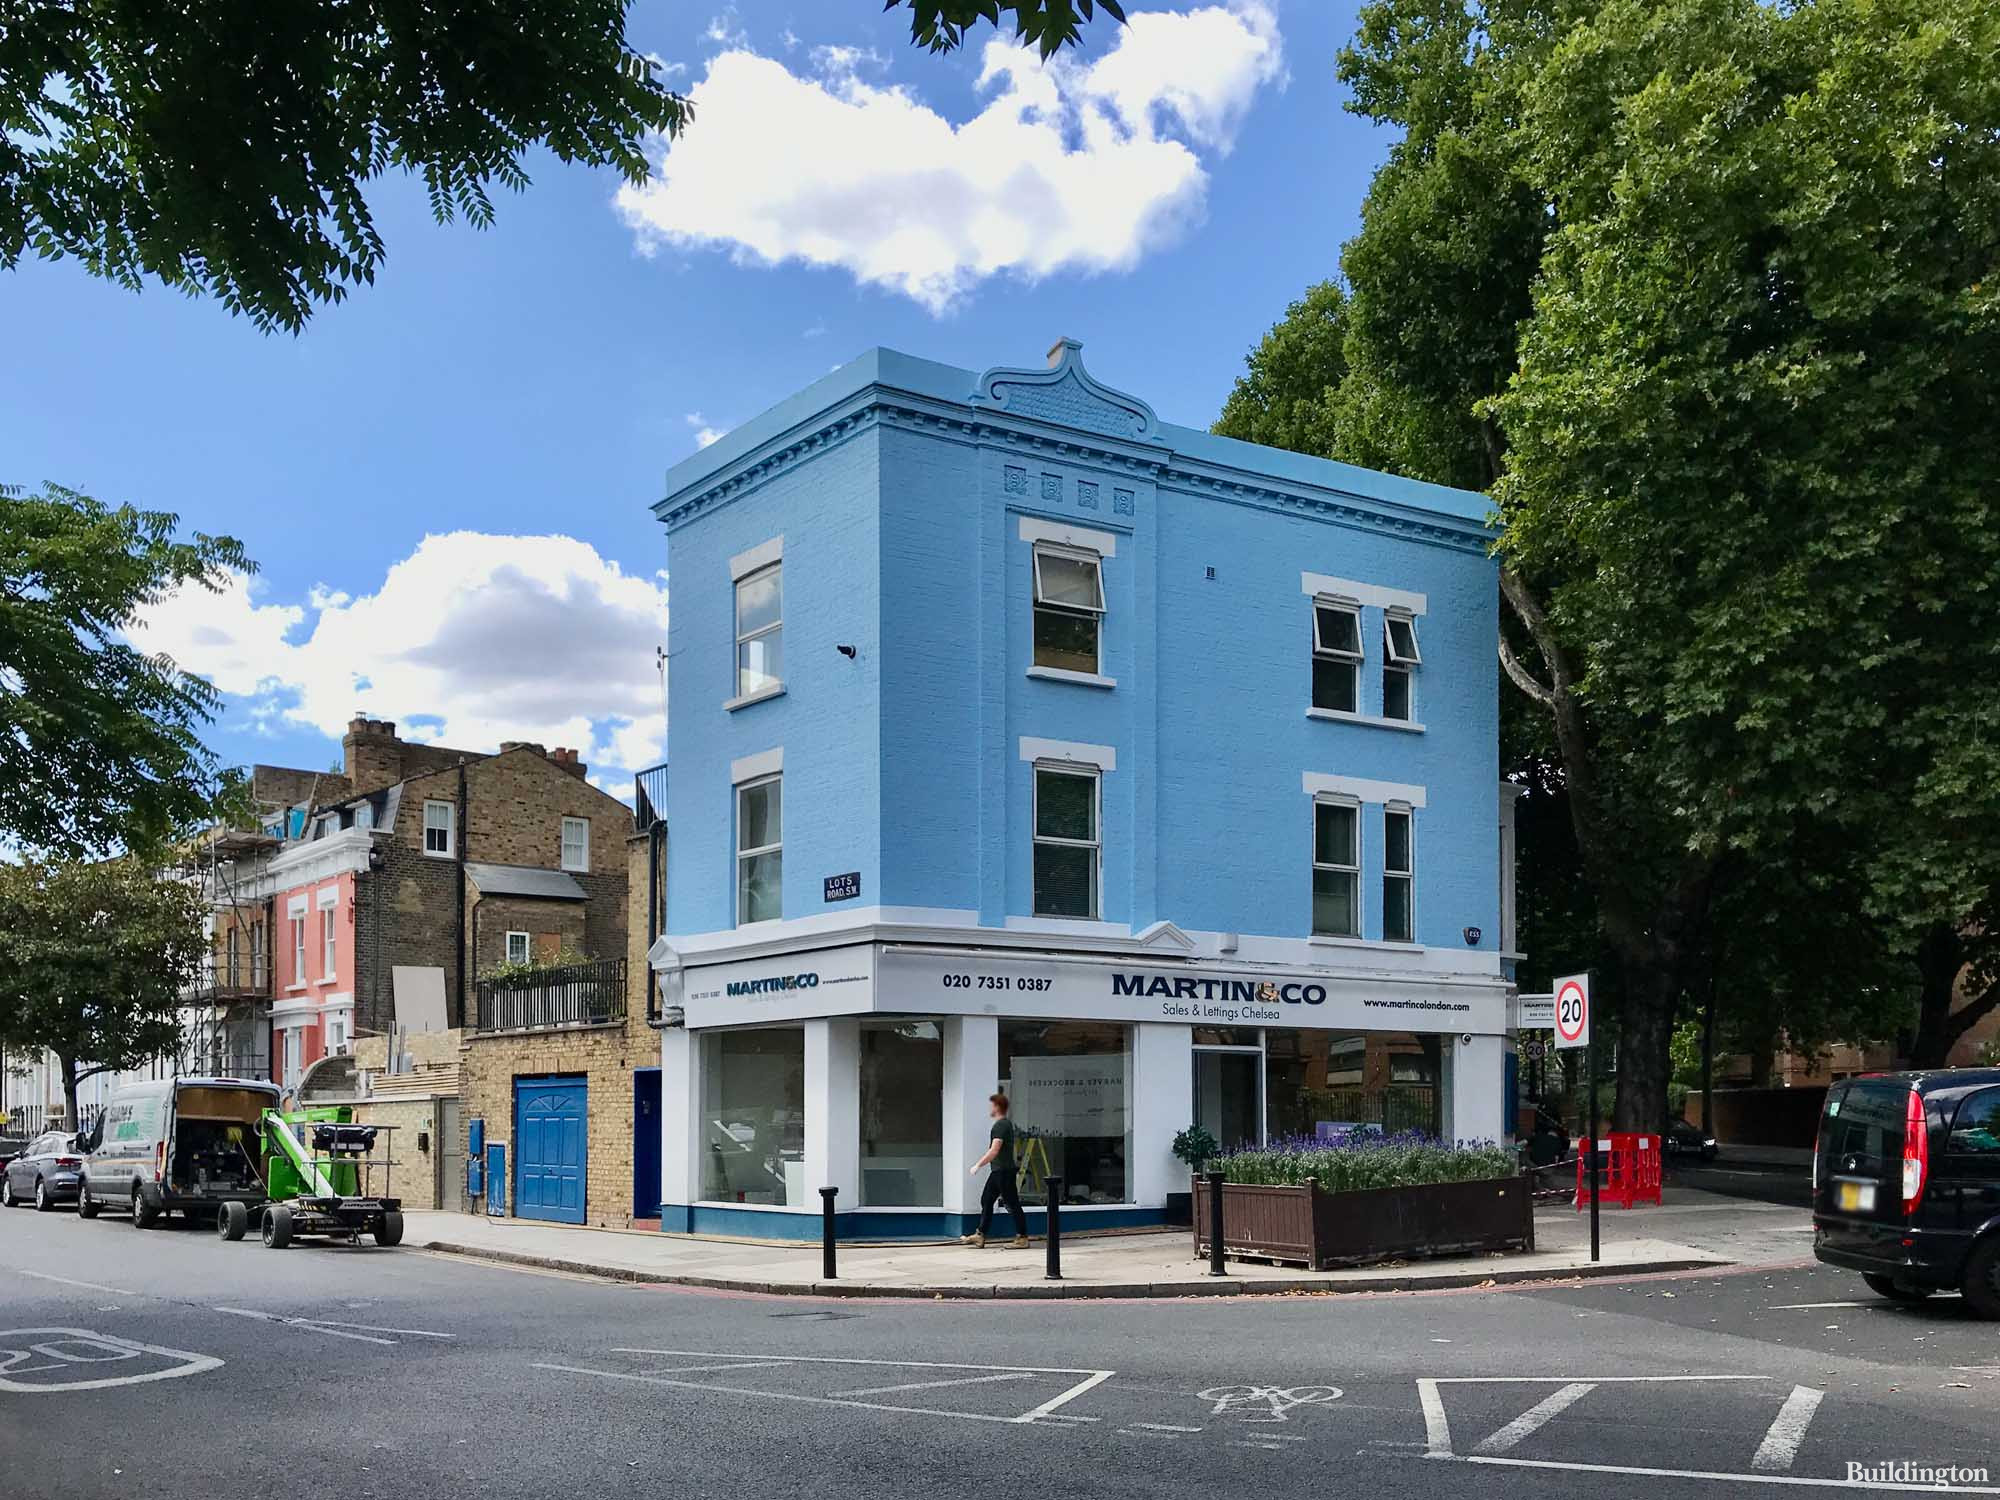 1 Cremorne Road on the corner of Lots Road and Cremorne Road in Chelsea, London SW10.